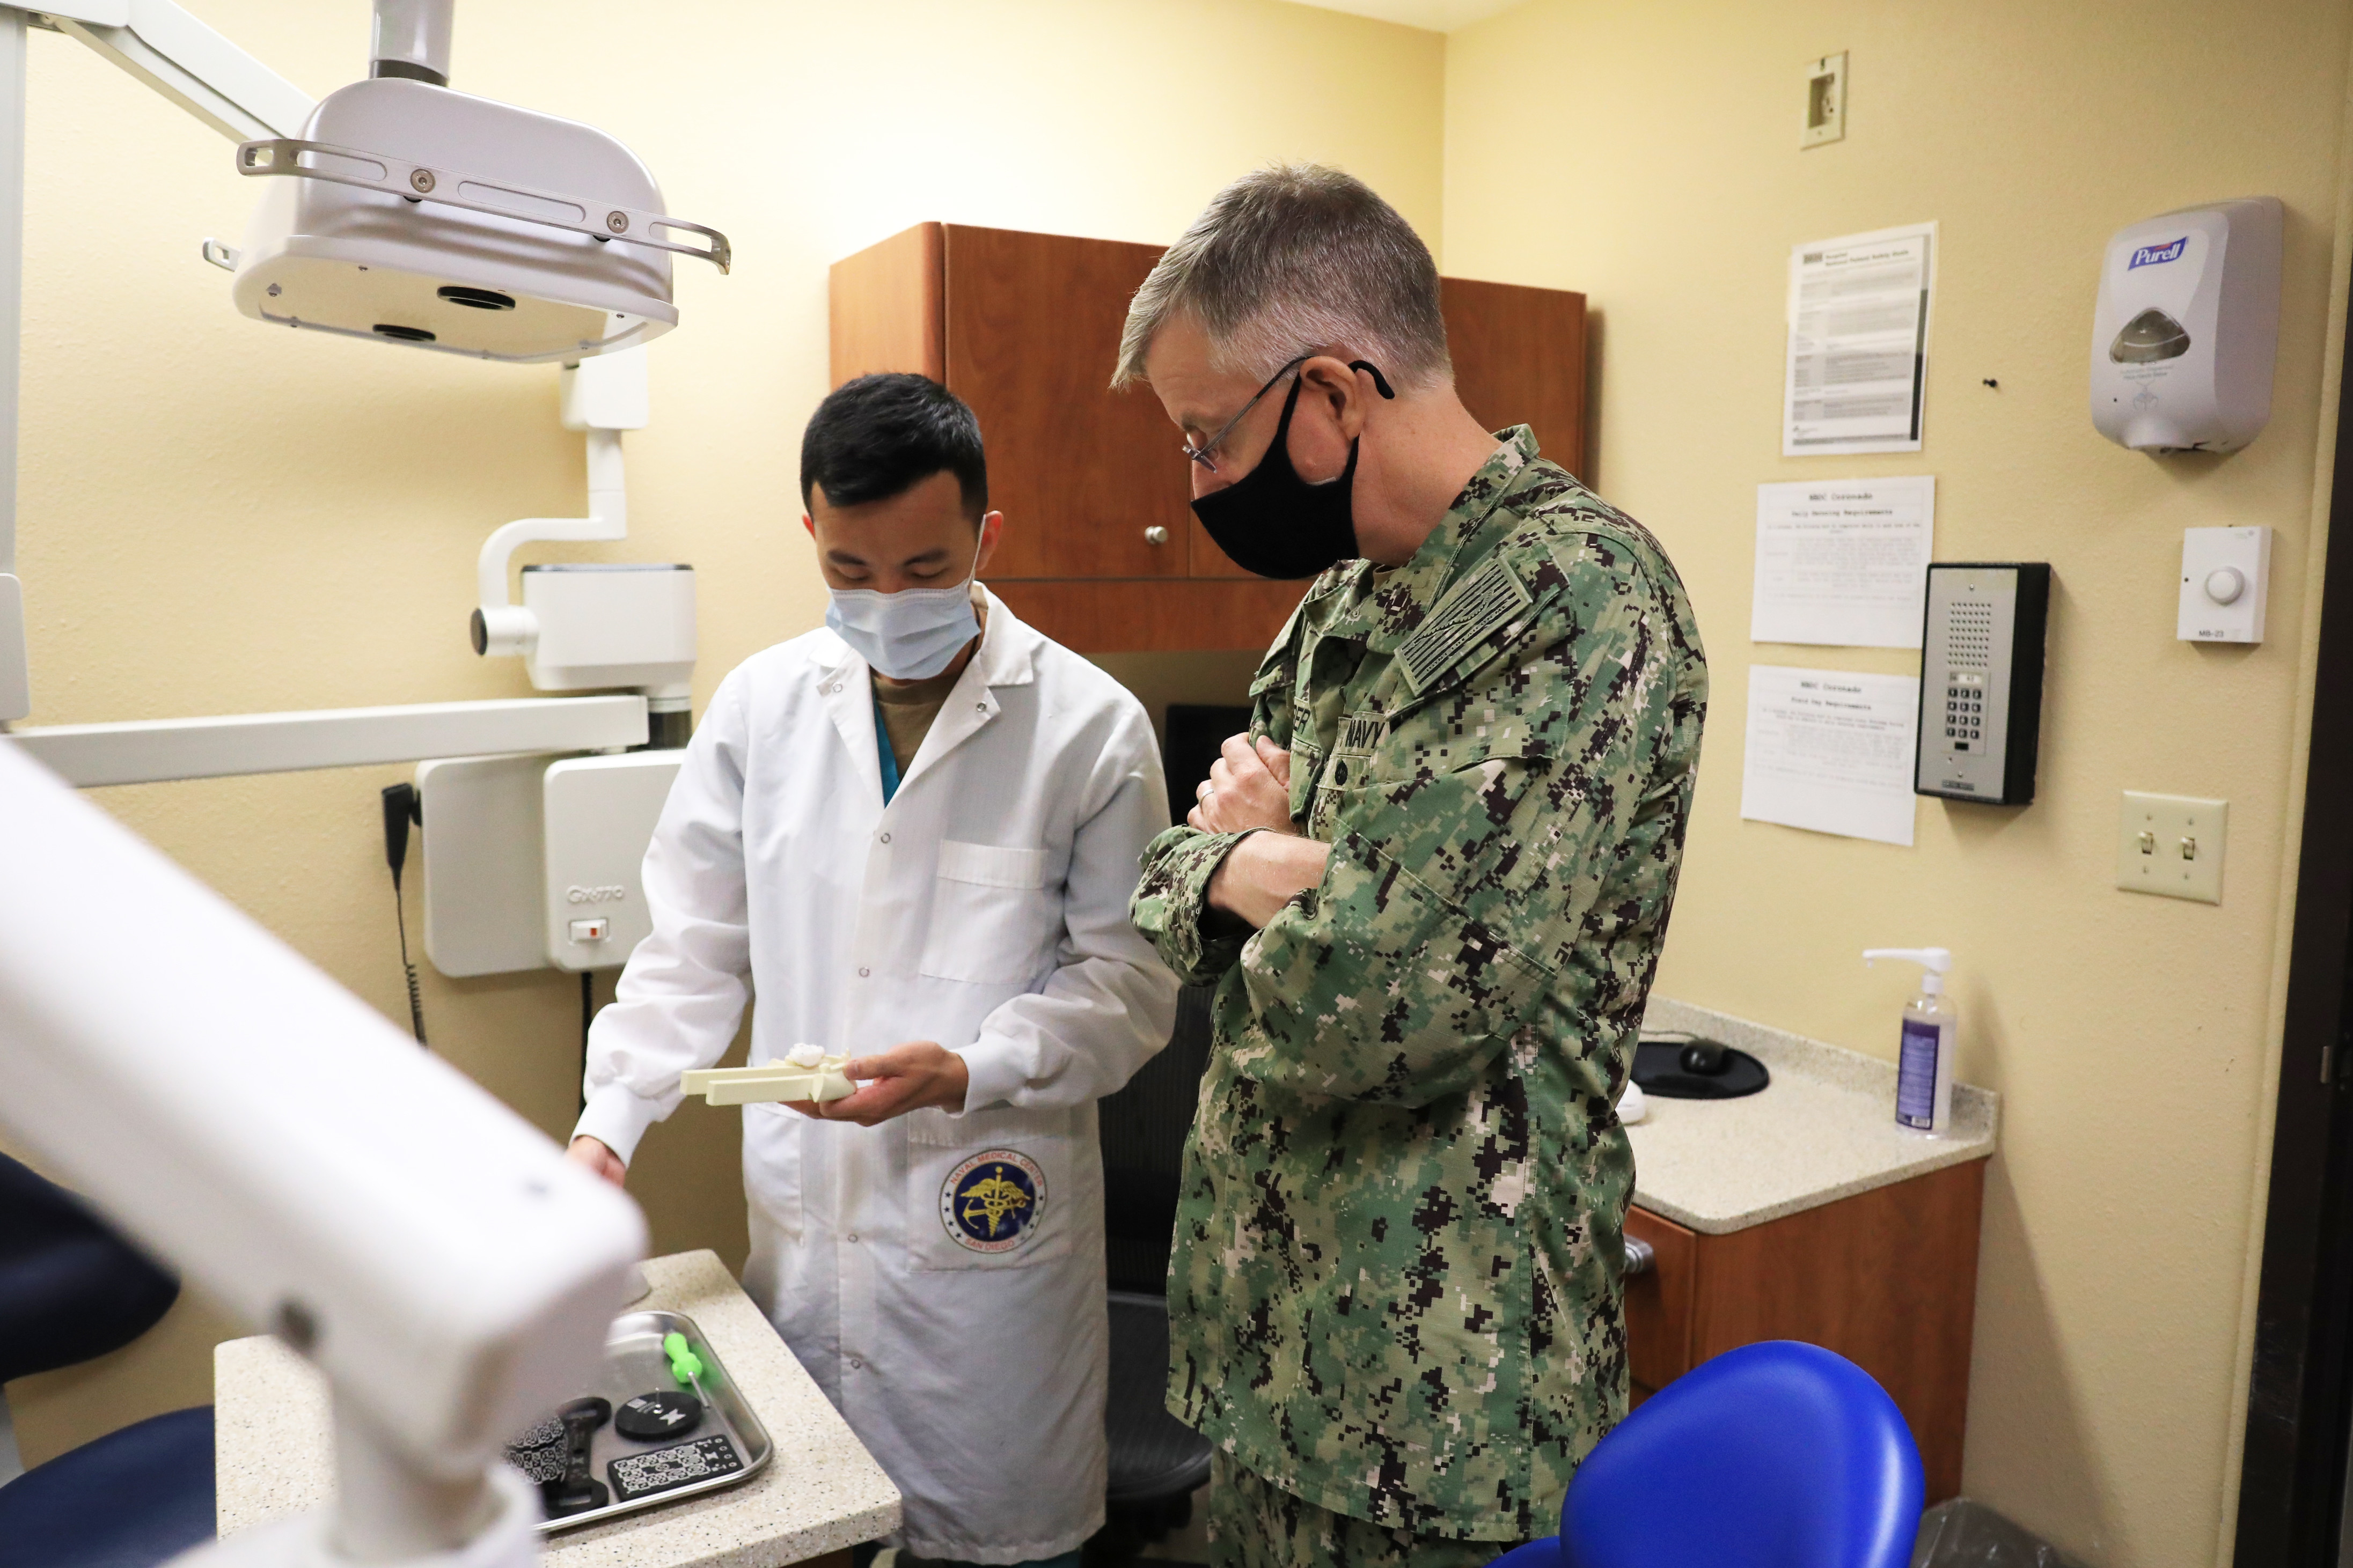 Lt. Cmdr. Thien Nguyen, a periodontist at Naval Air Station North Island's dental clinic, talks with Rear Adm. Tim Weber, commander, Naval Medical Forces Pacific (NMFP), during an official visit.